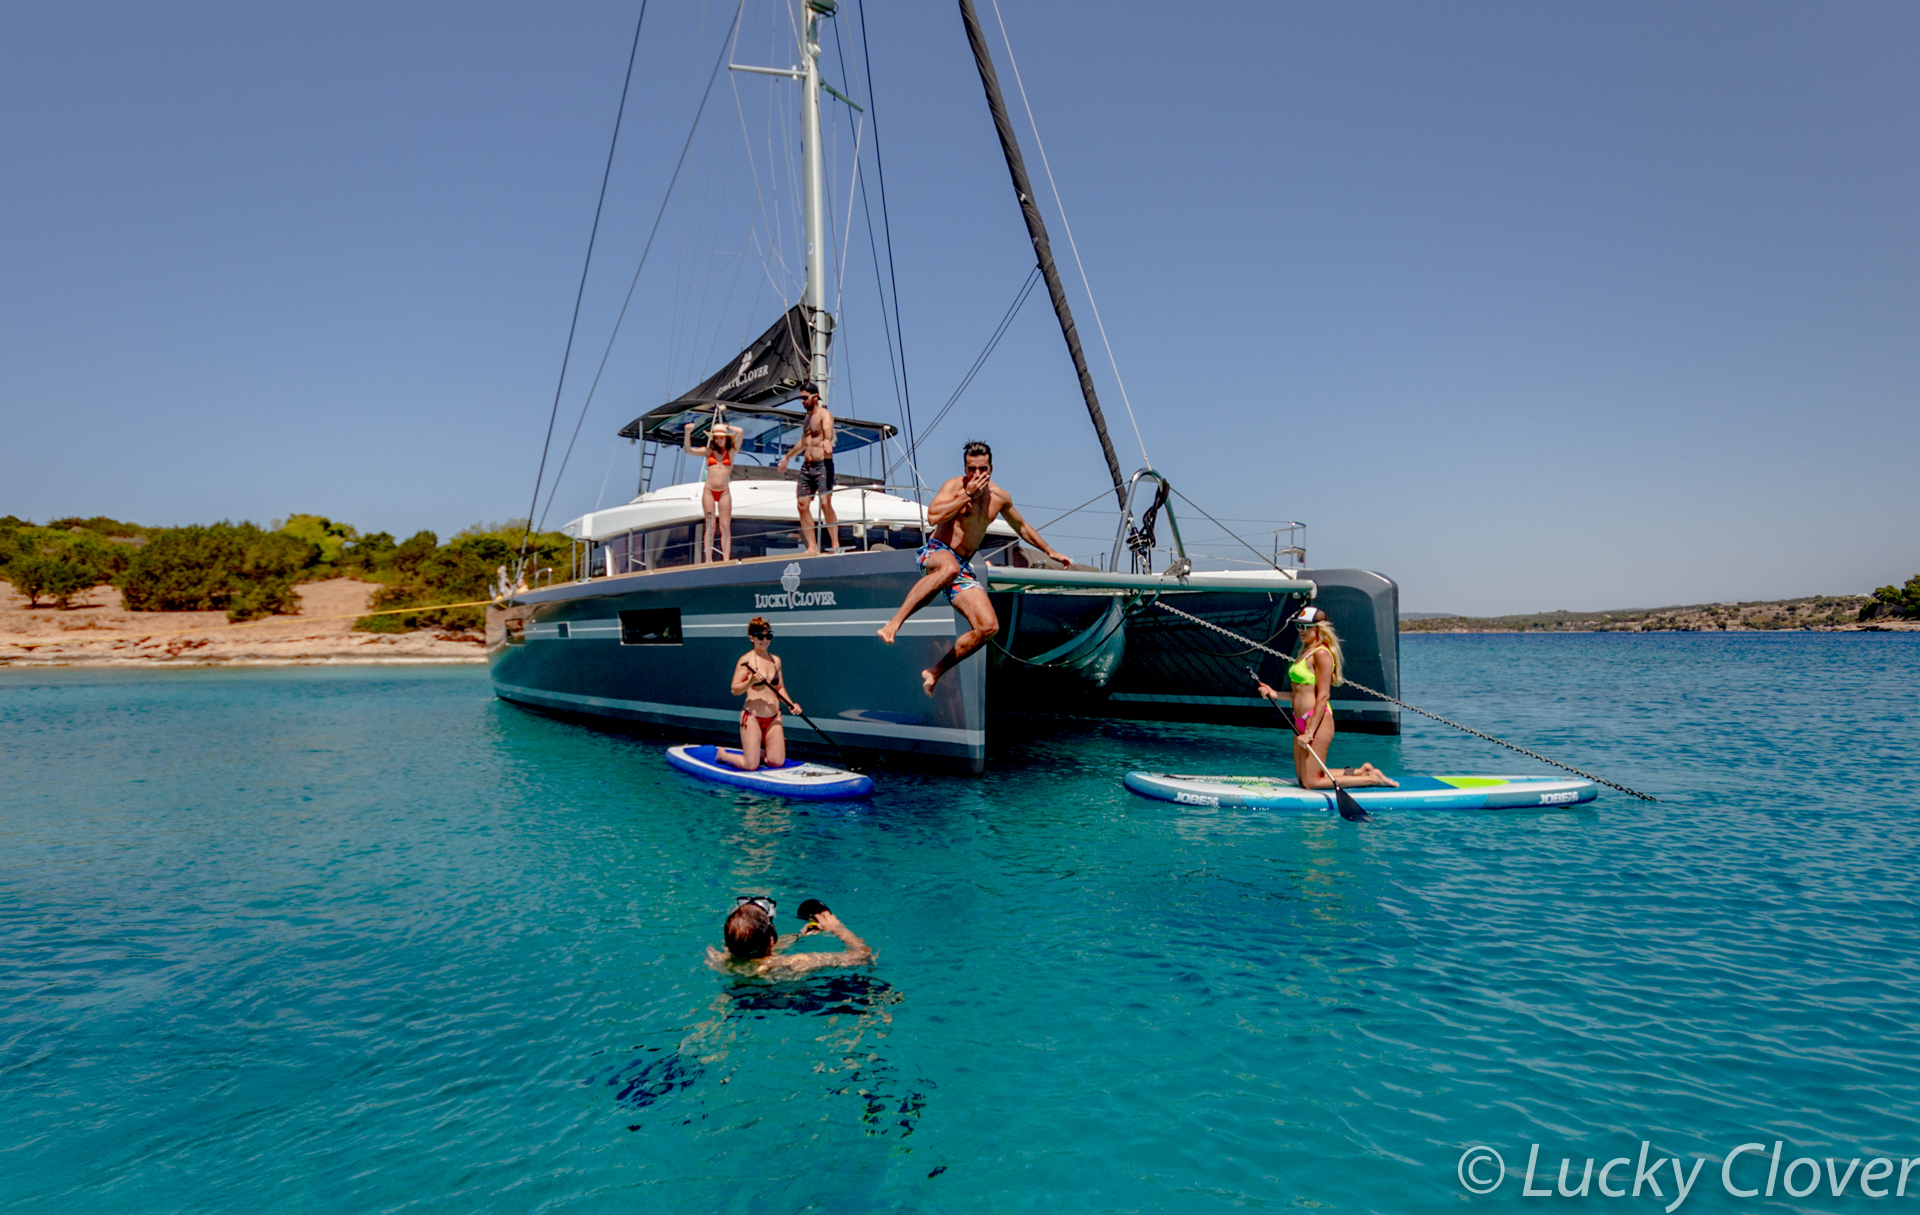 Yachting 2021 Luckyclover Watersports Web 2 2